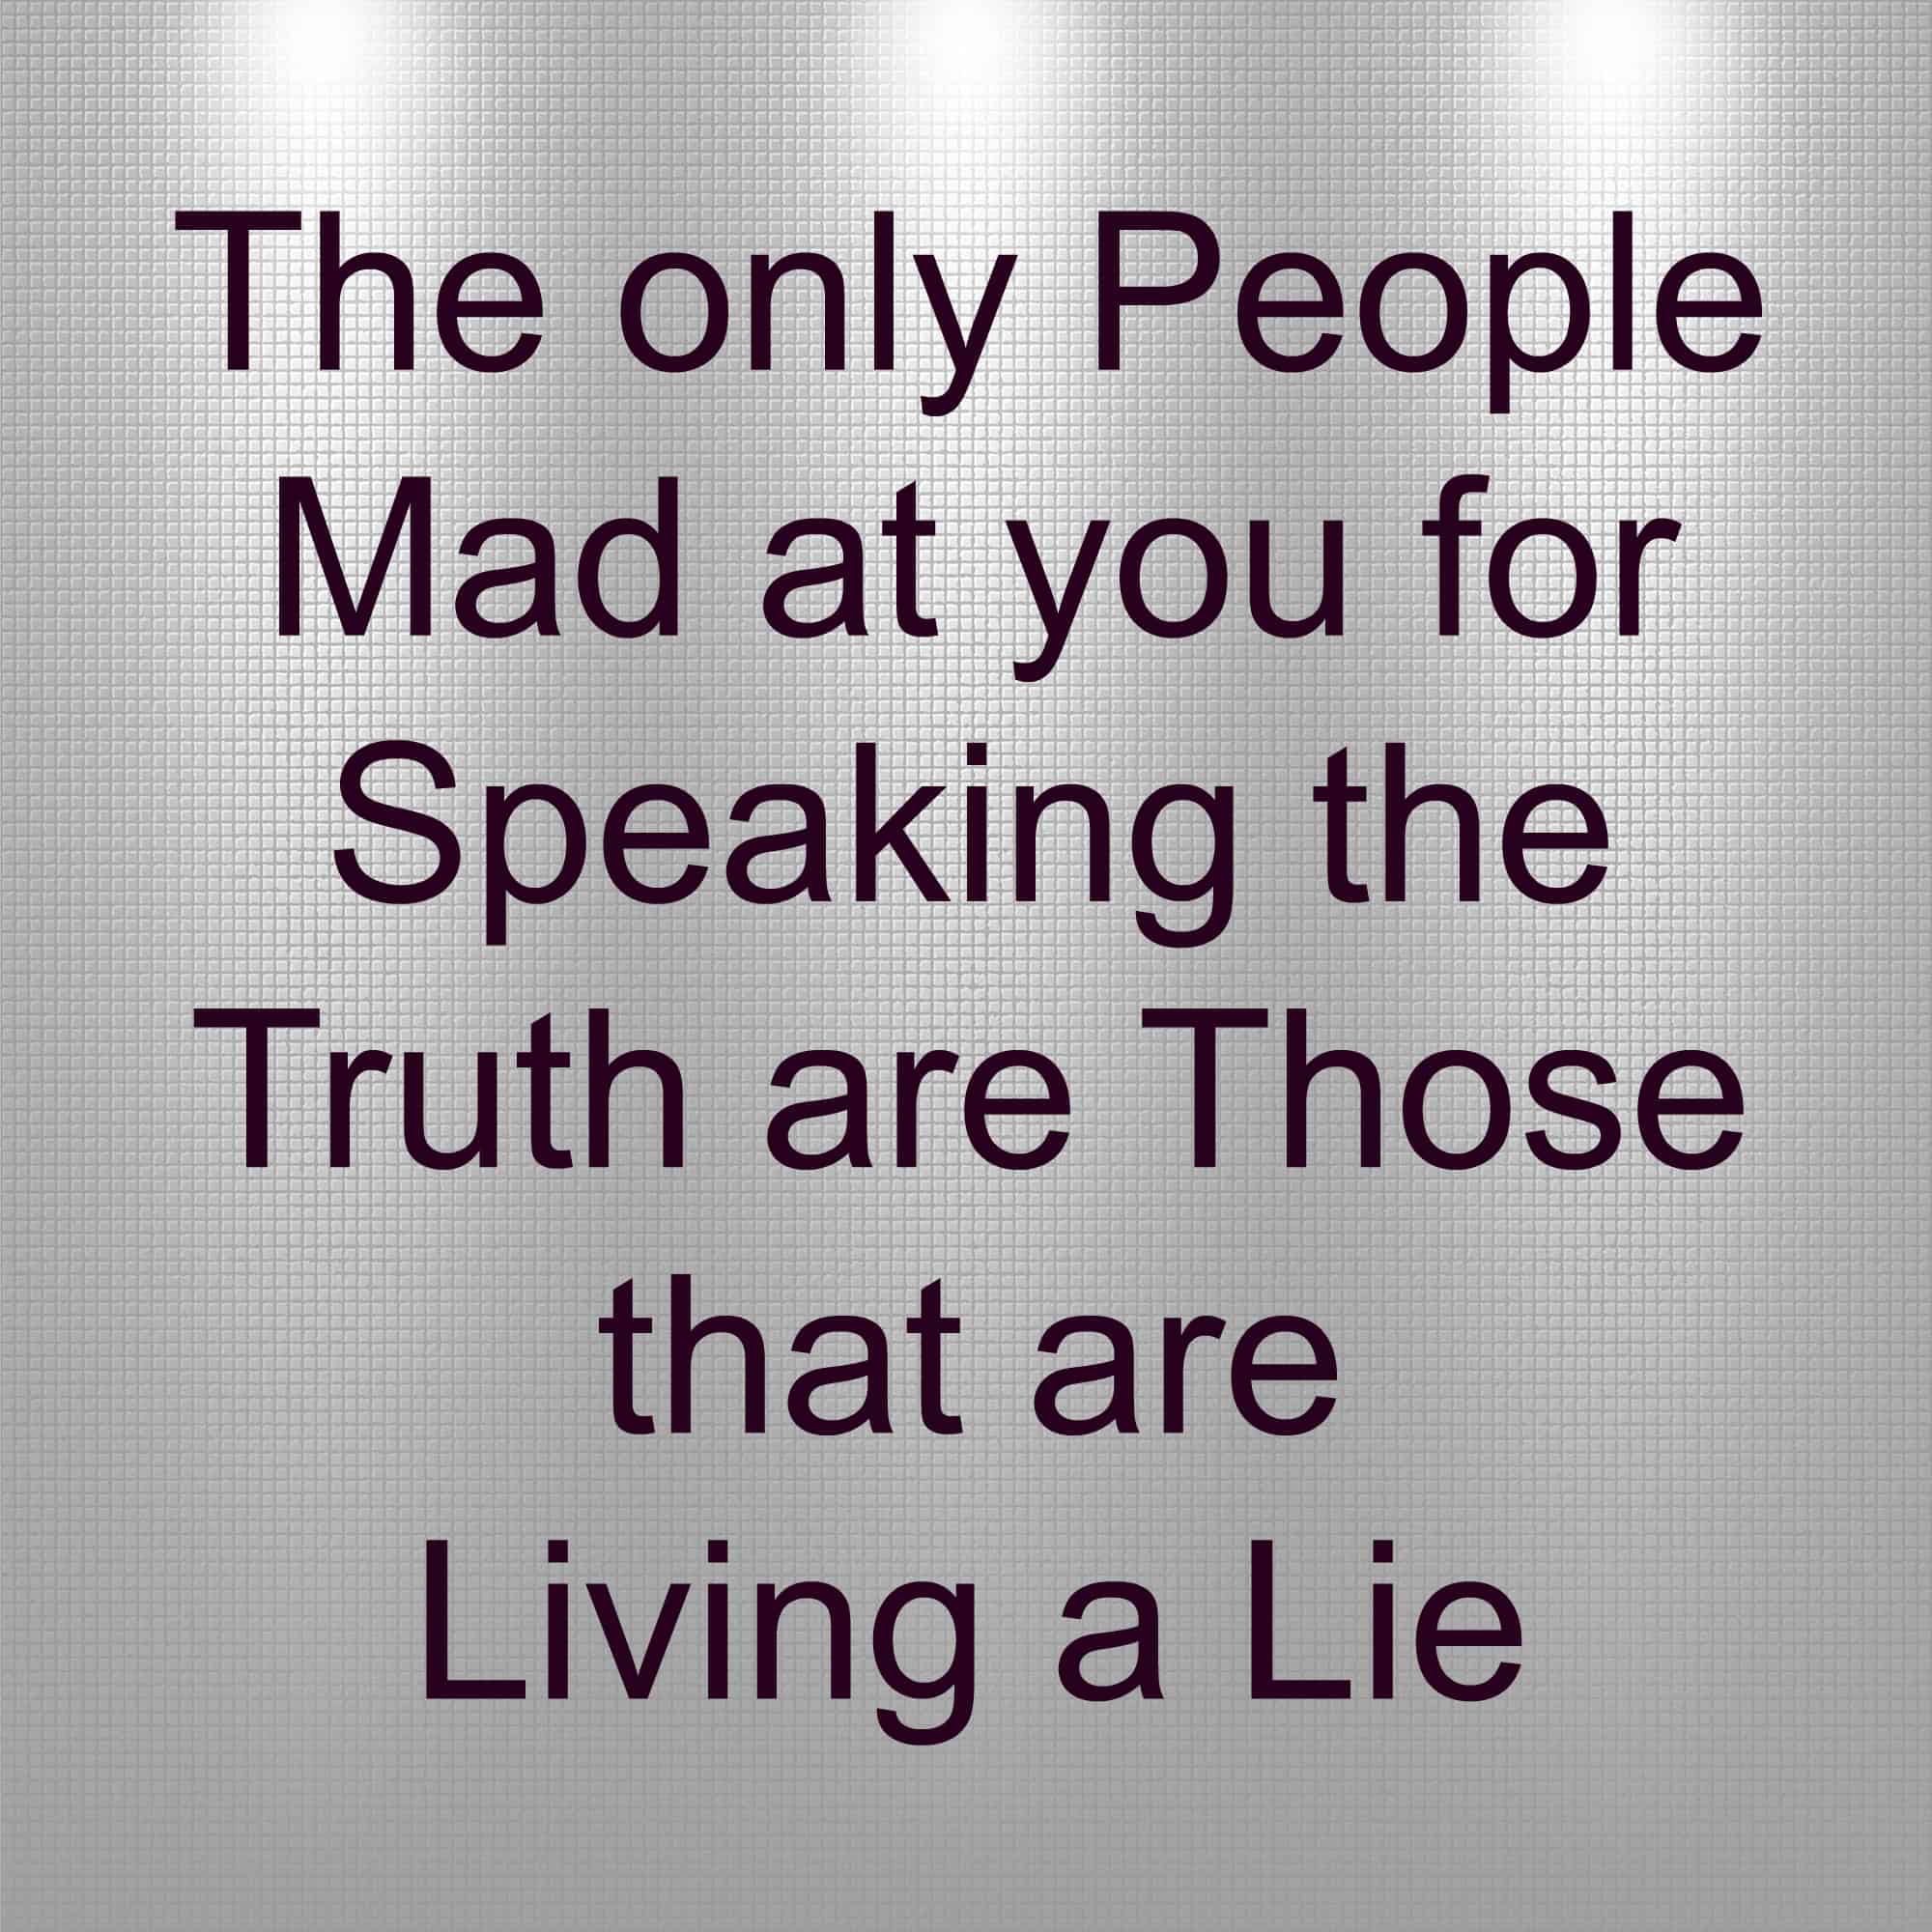 The Only People Mad at you for speaking the truth are those that are living a lie. Cheaters, liars, dishonesty